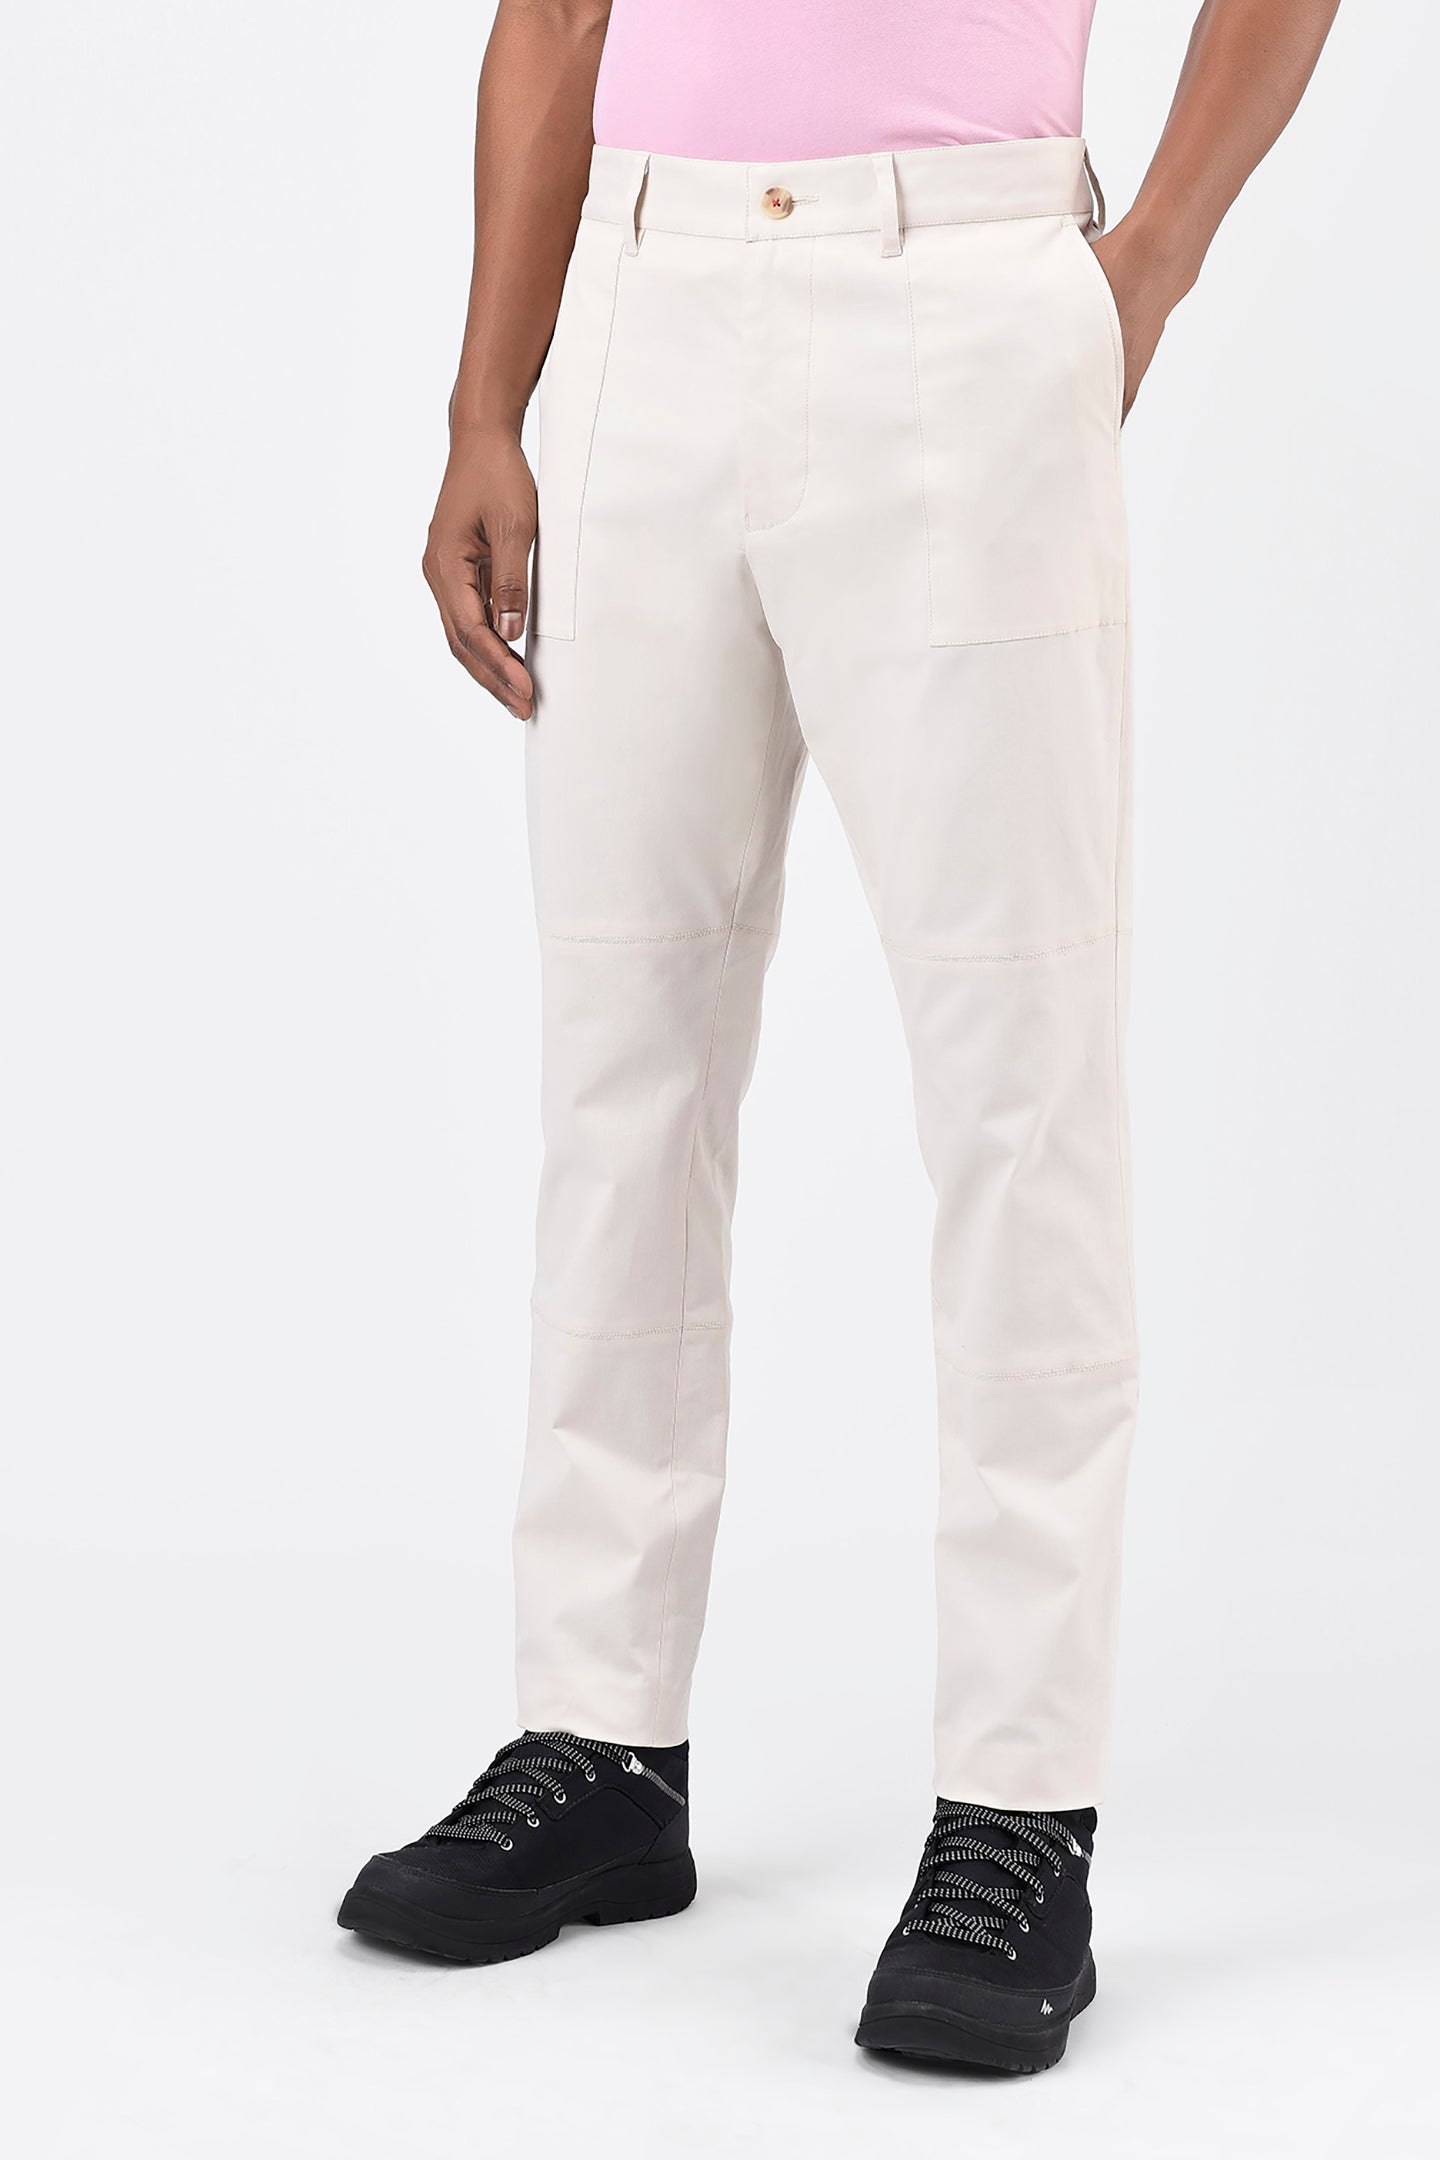 Mens Regular Fit Trousers with Special Details